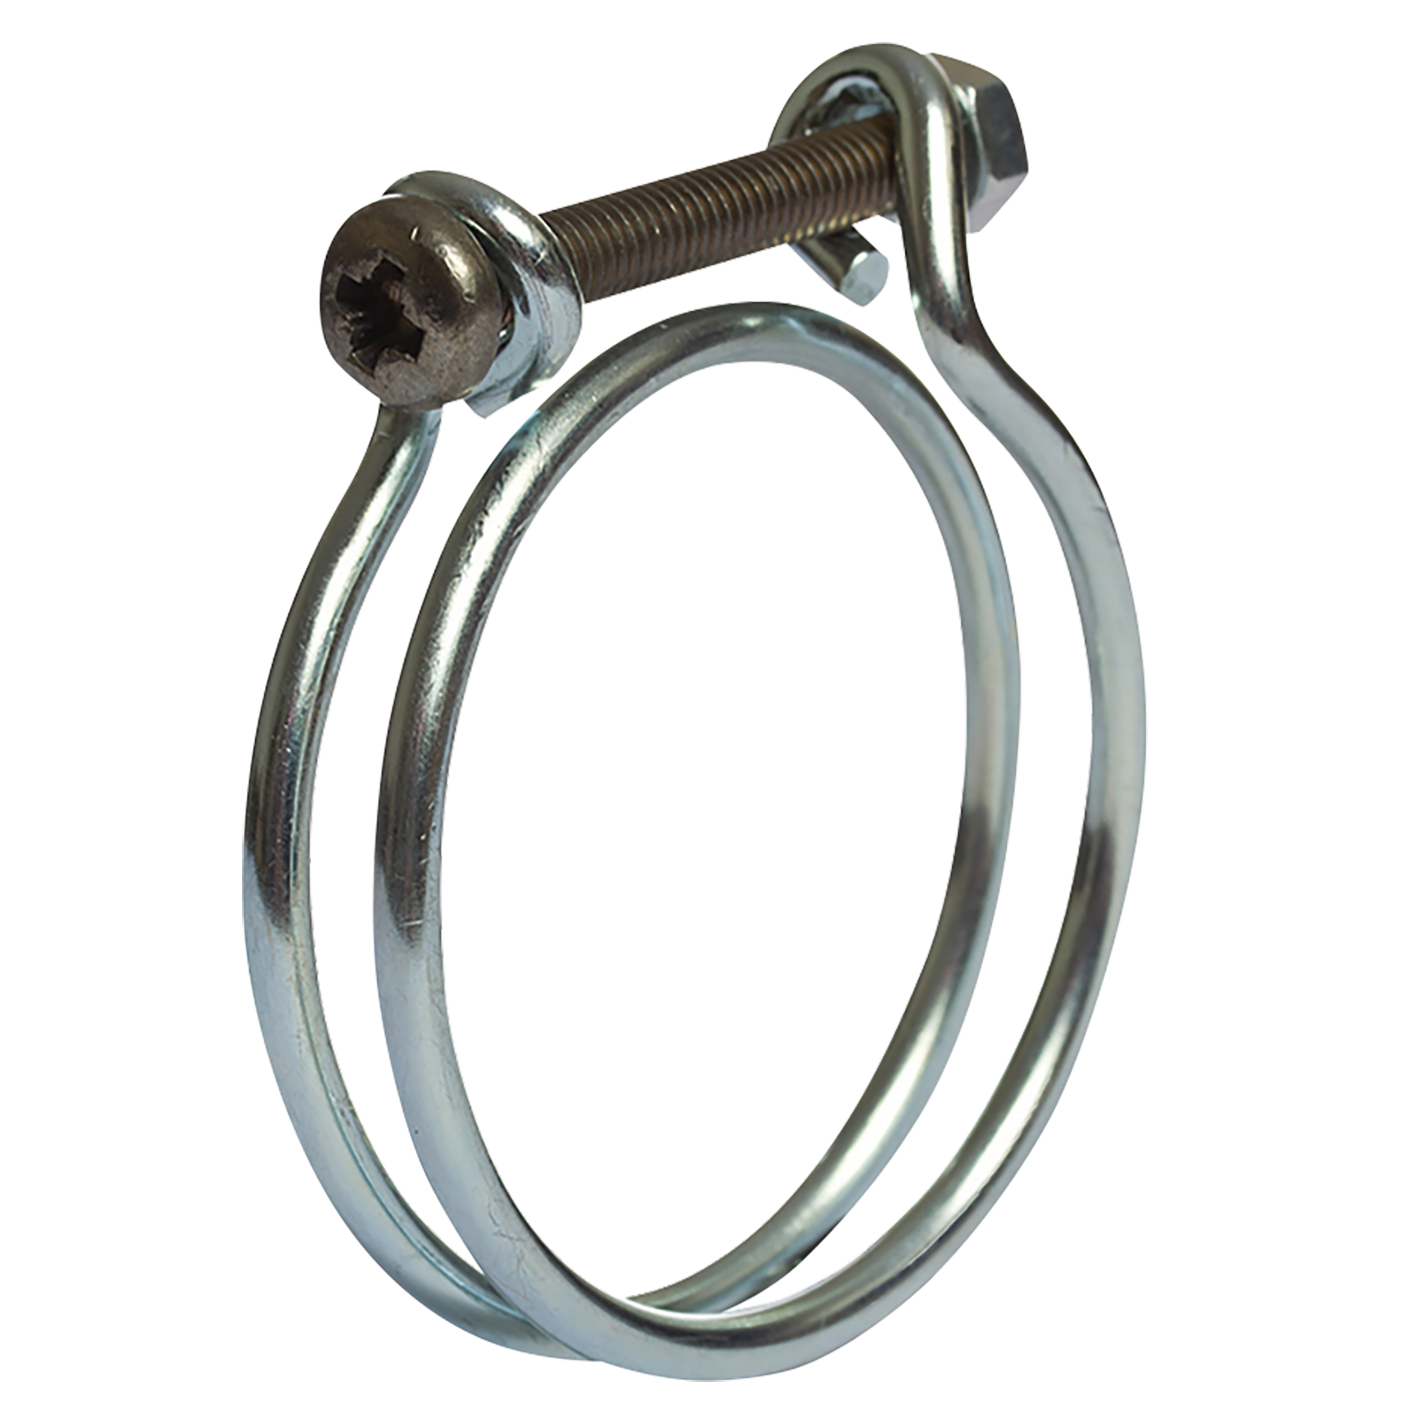 125MM ST/ST R/HAND SPIRAL WRAP CLAMP